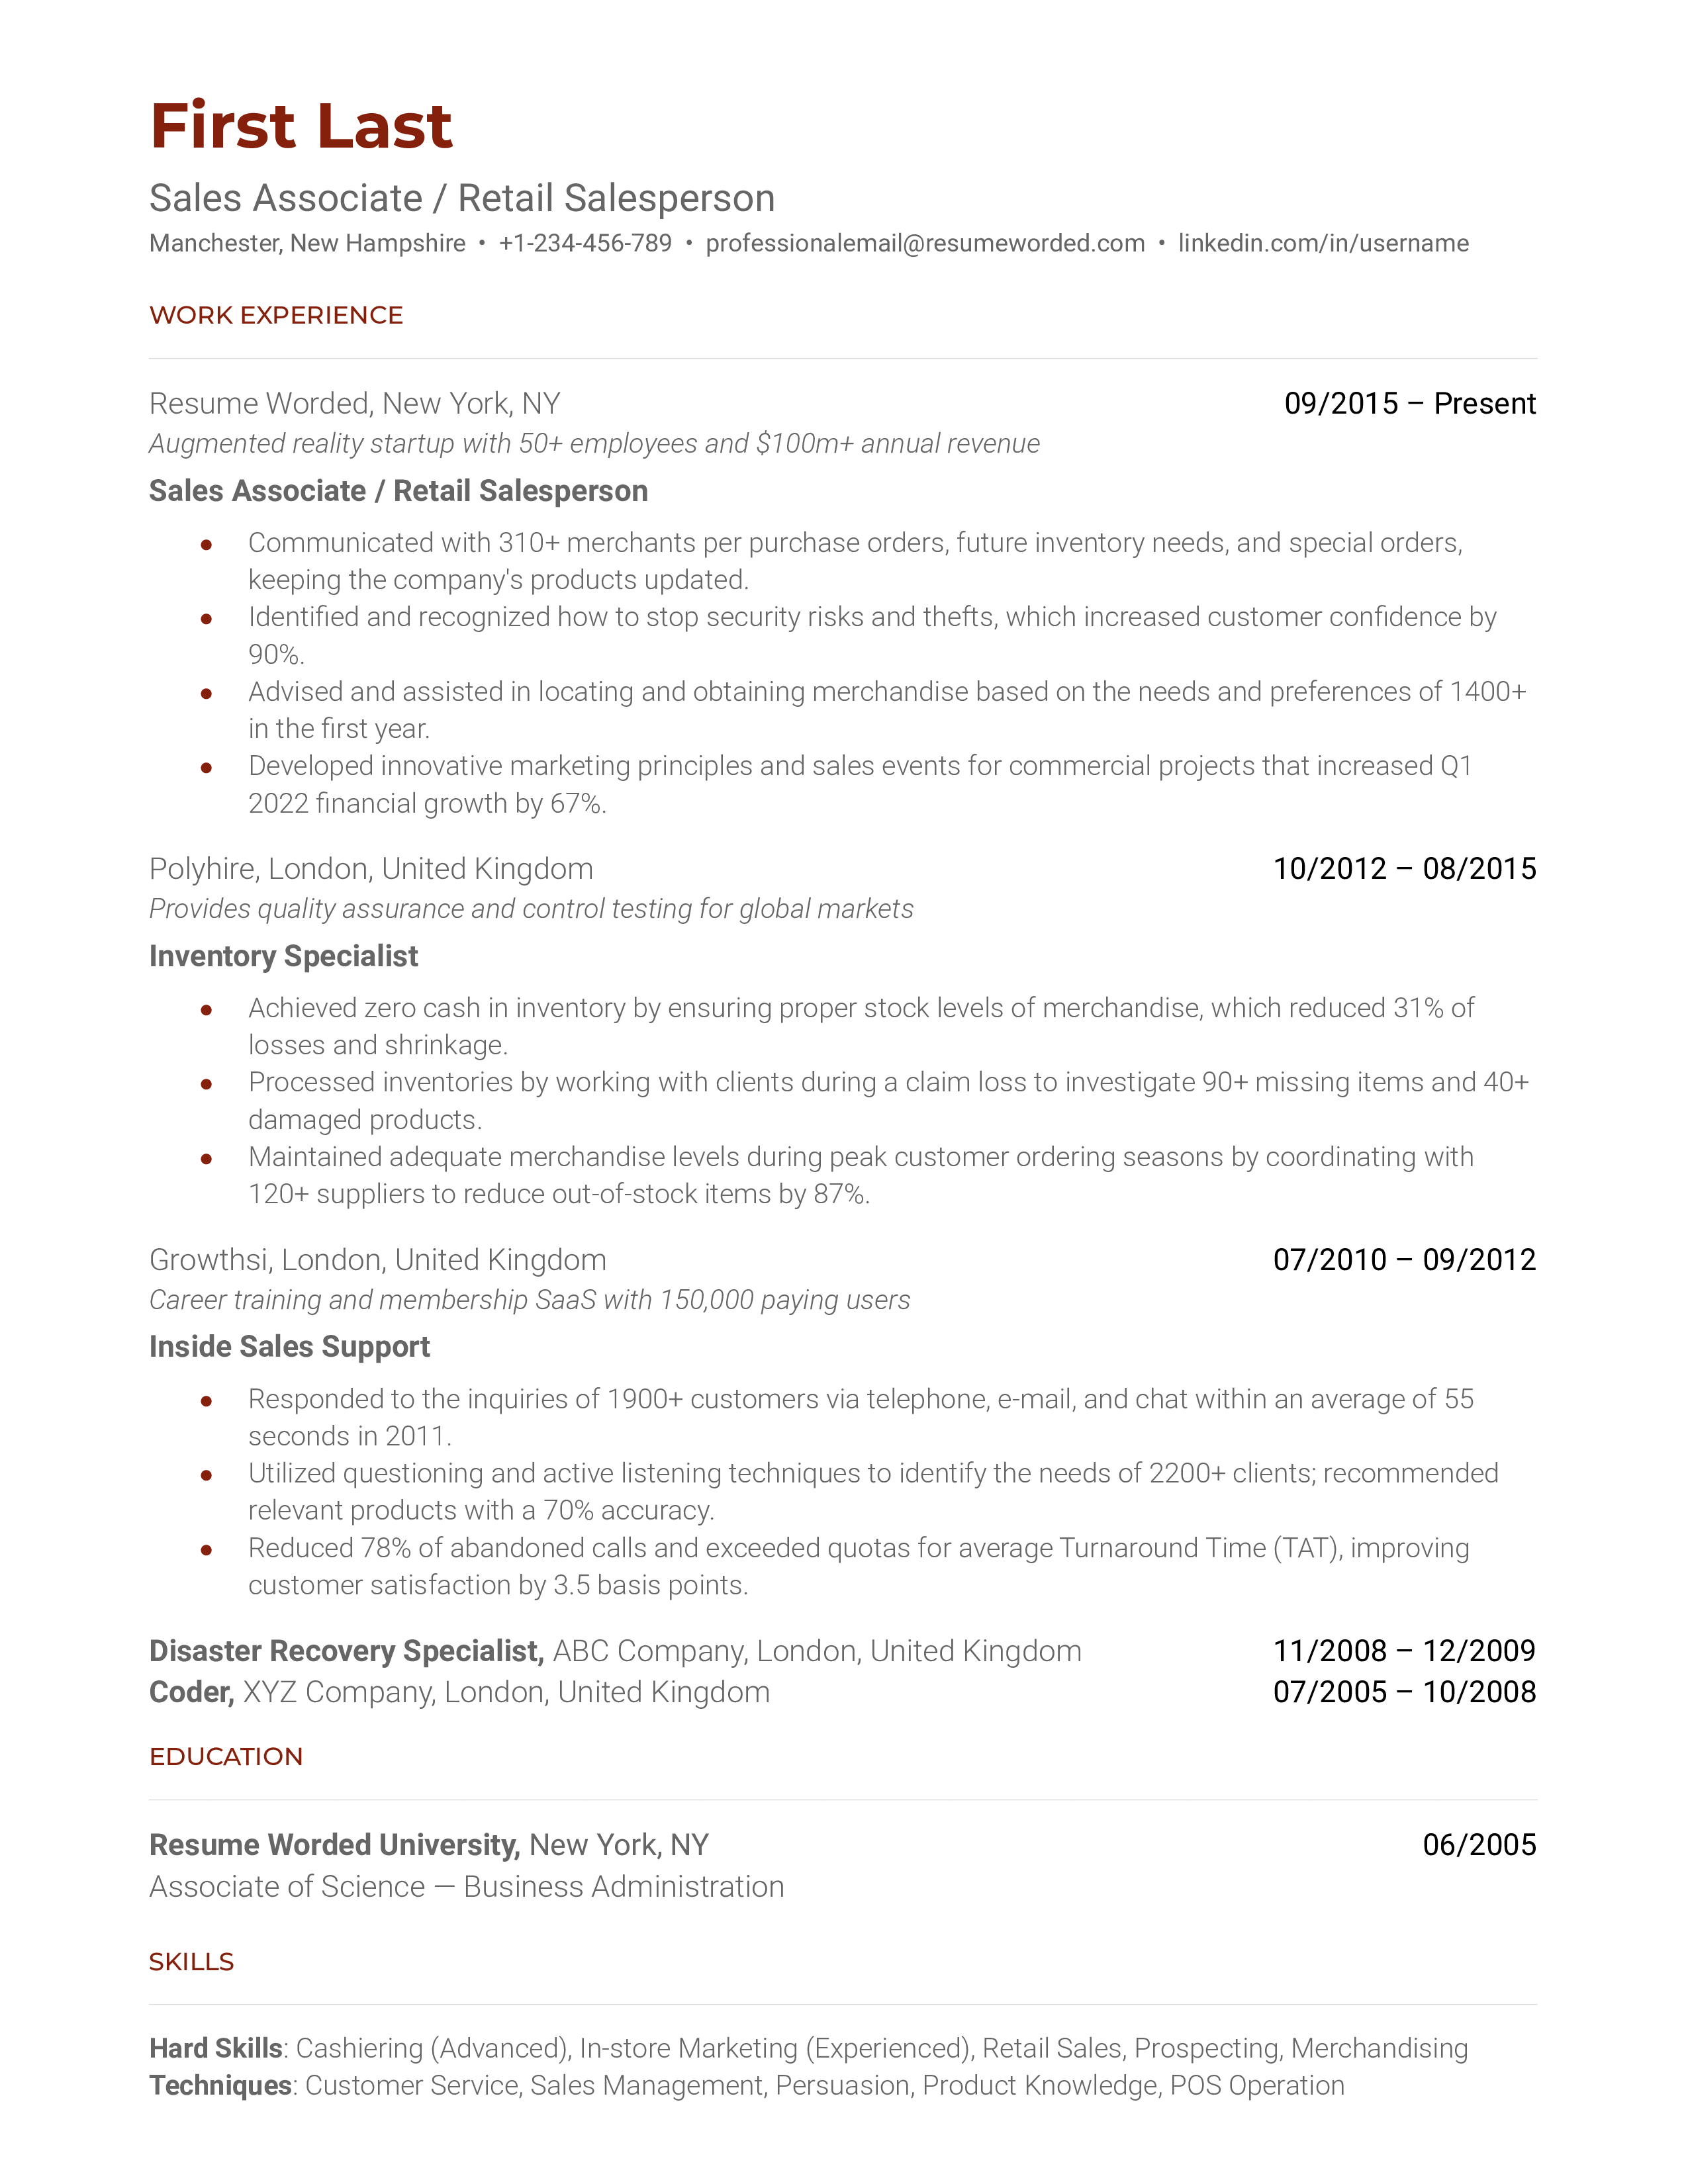 Sales associate resume showcasing customer service and sales achievements